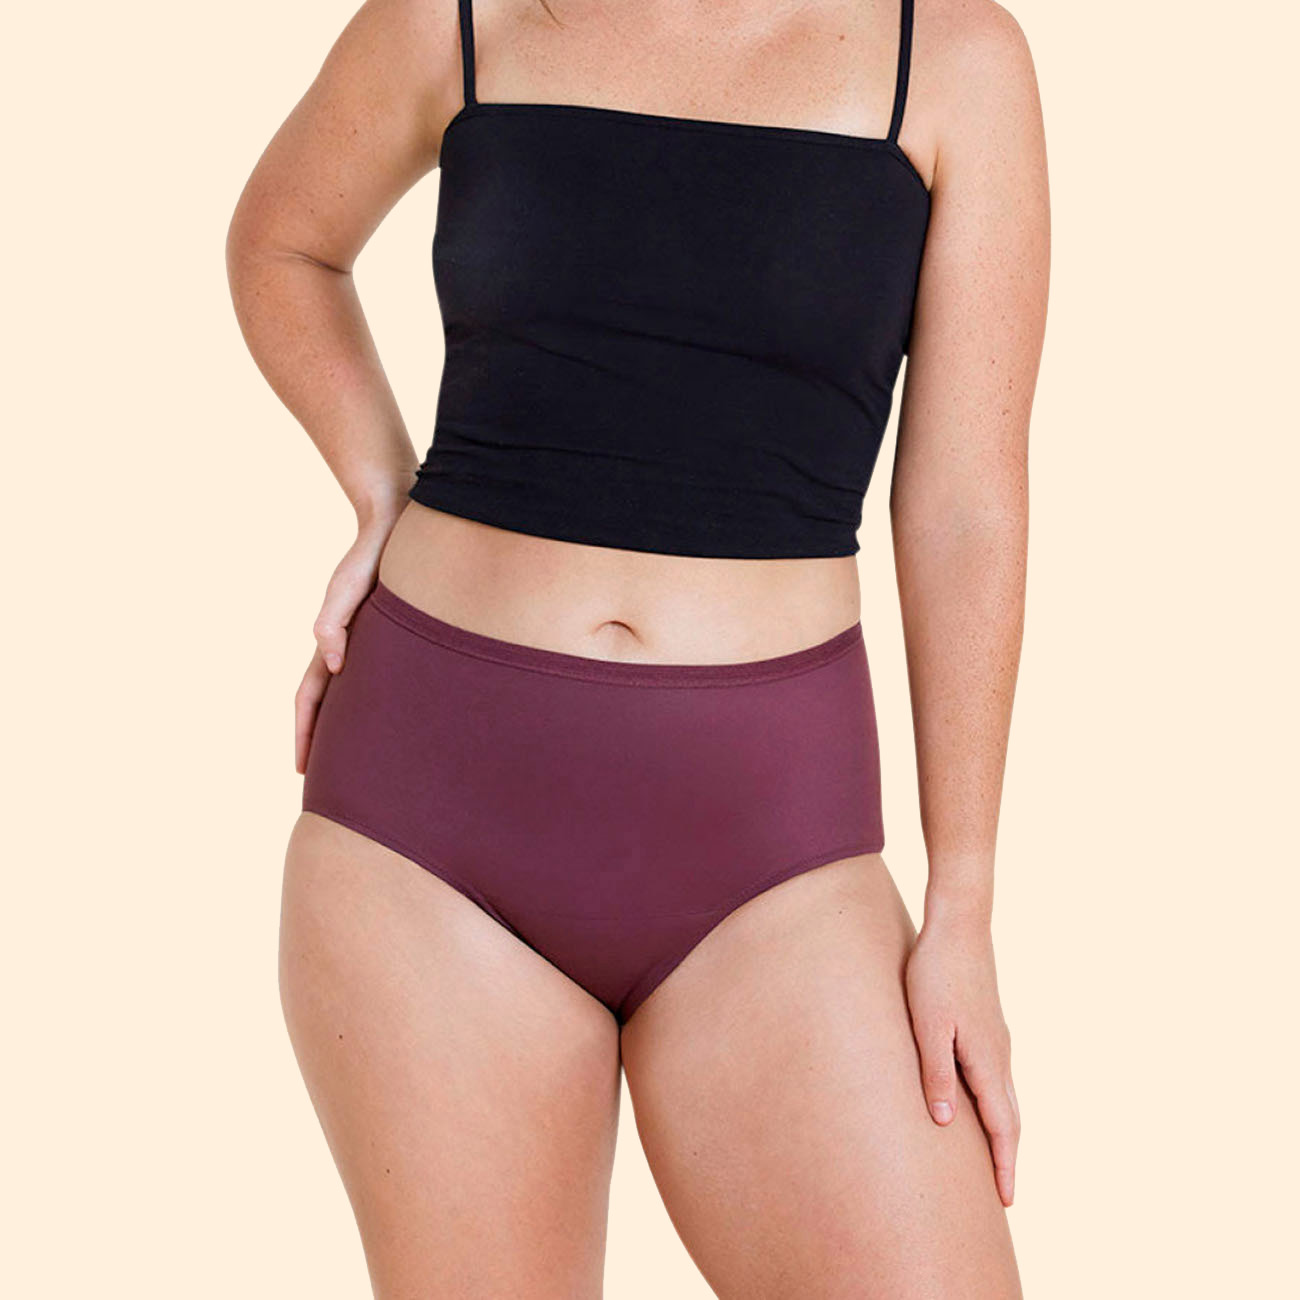 Thinx for All Leaks - If you haven't shopped our 20% Off Sale yet